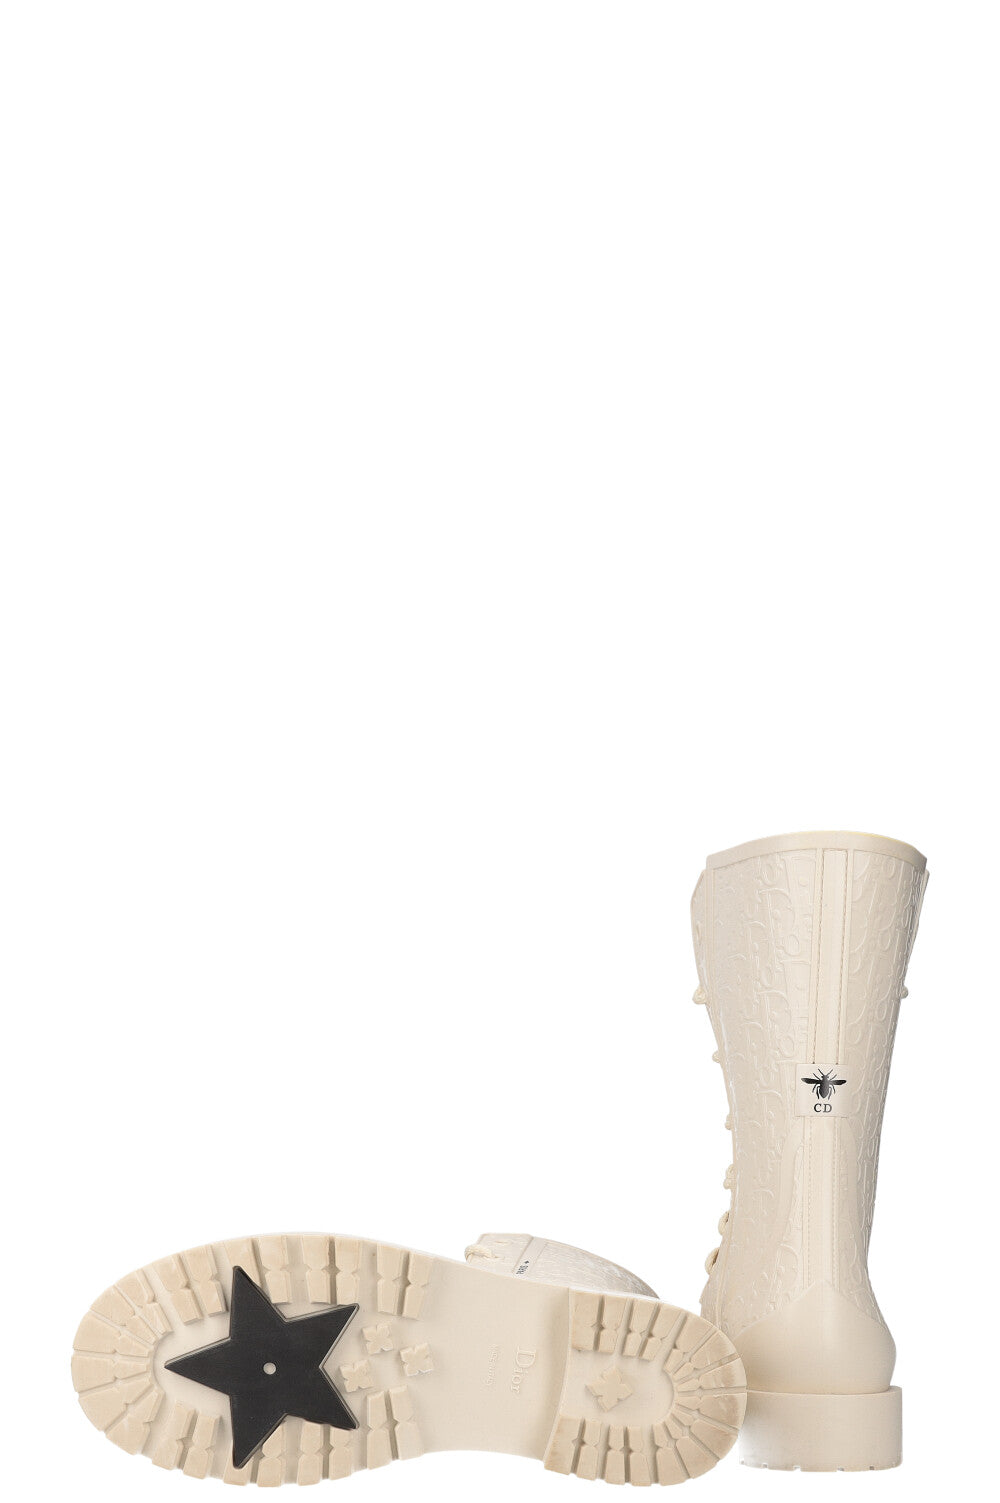 Christian Dior Genesis Rubber Ankle Boots Off White/Ivory